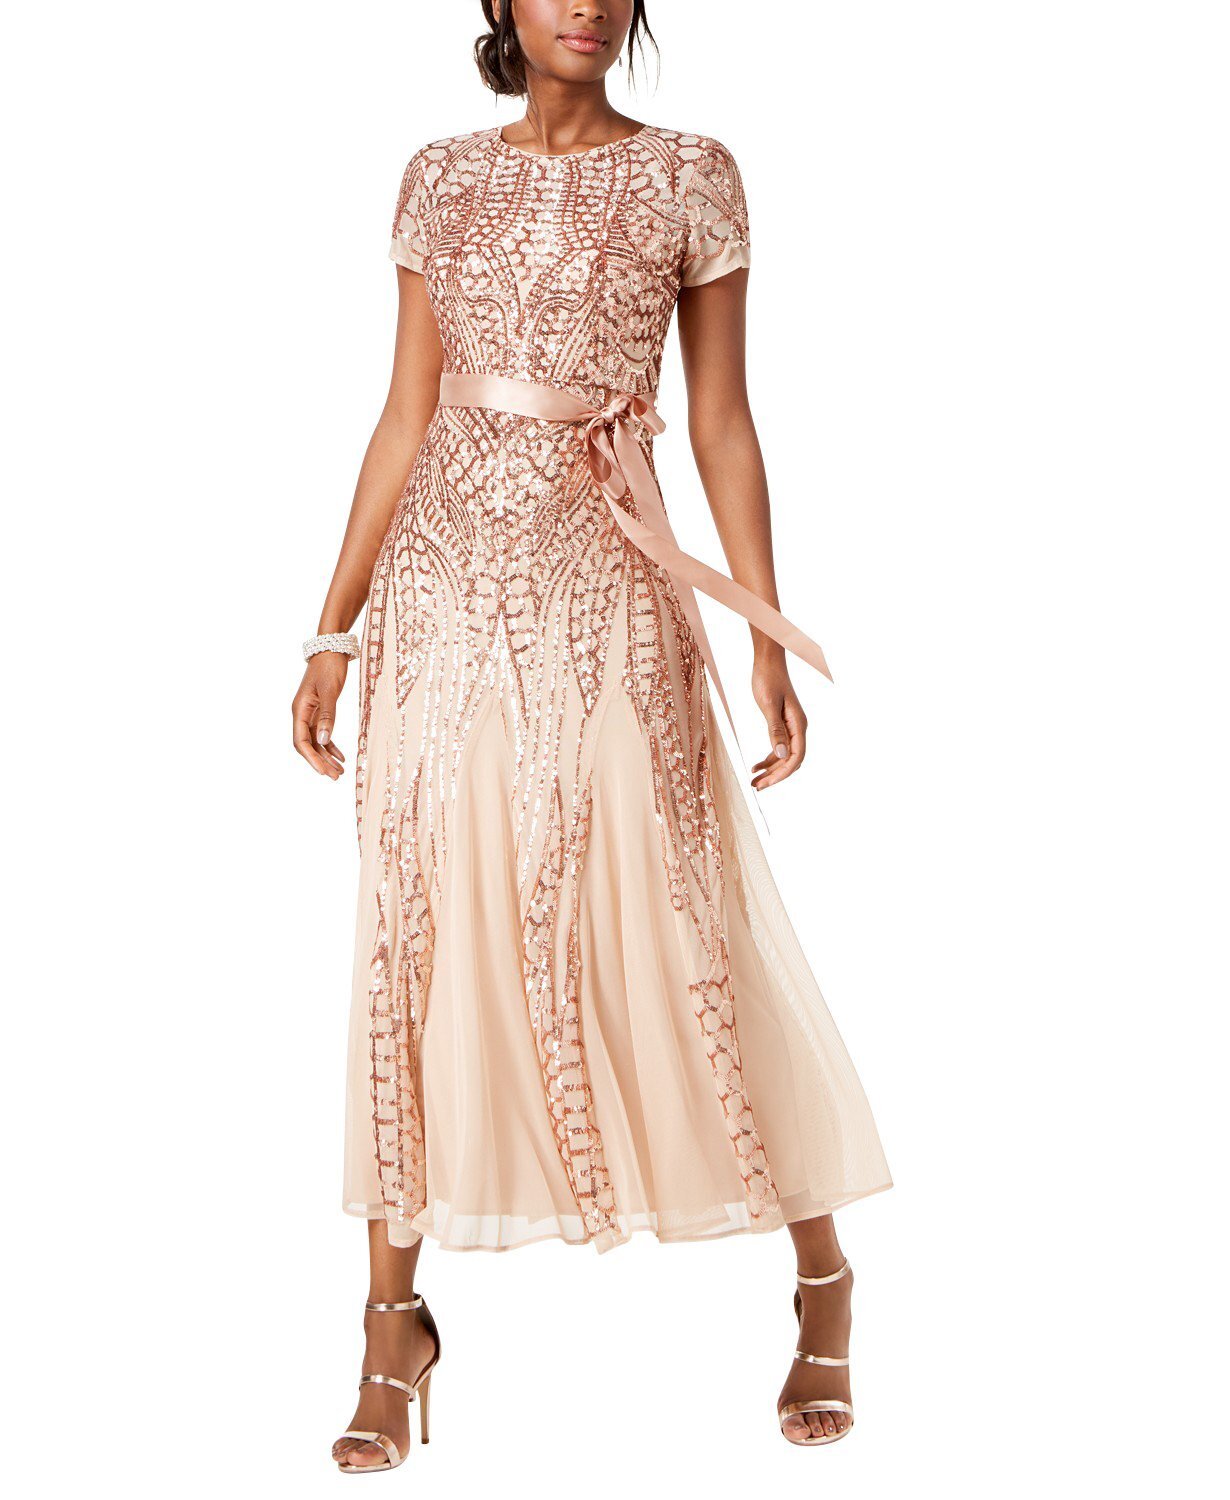 Women's One Piece Short Sleeve Embellished Sequin Evening Gown - Missy